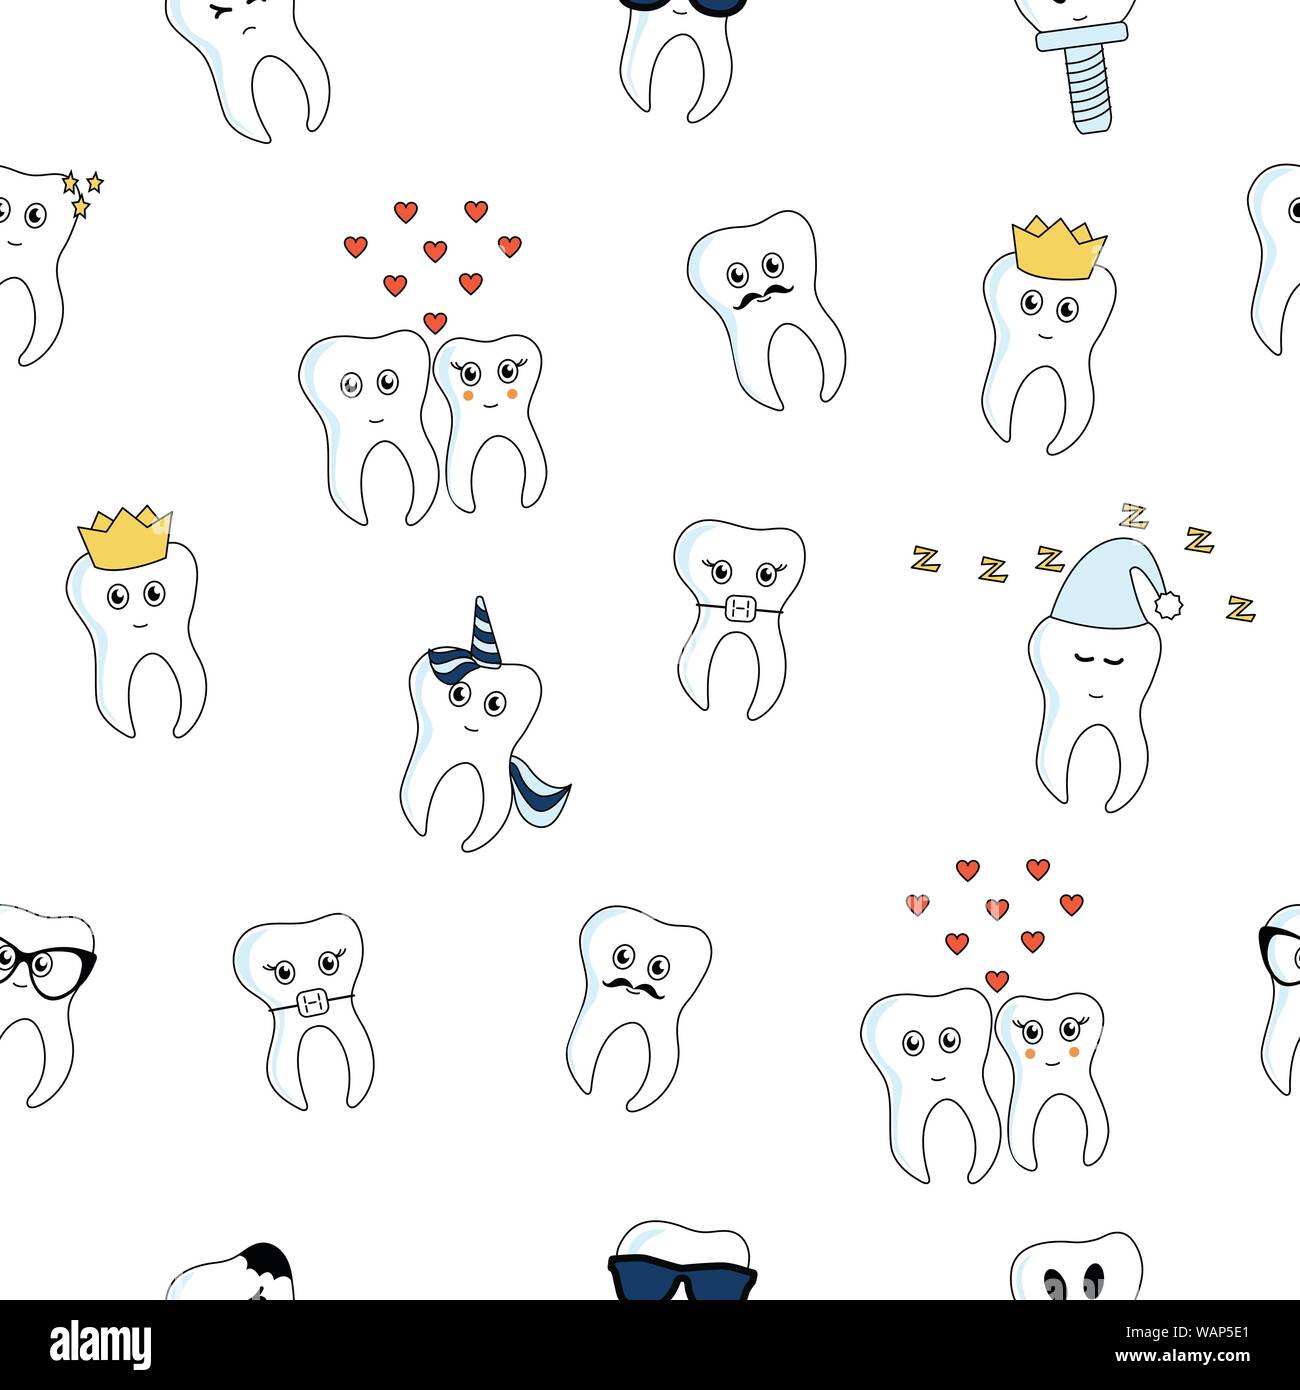 Funny cartoon tooth stickers seamless pattern. Isolated on white. Stock Vector